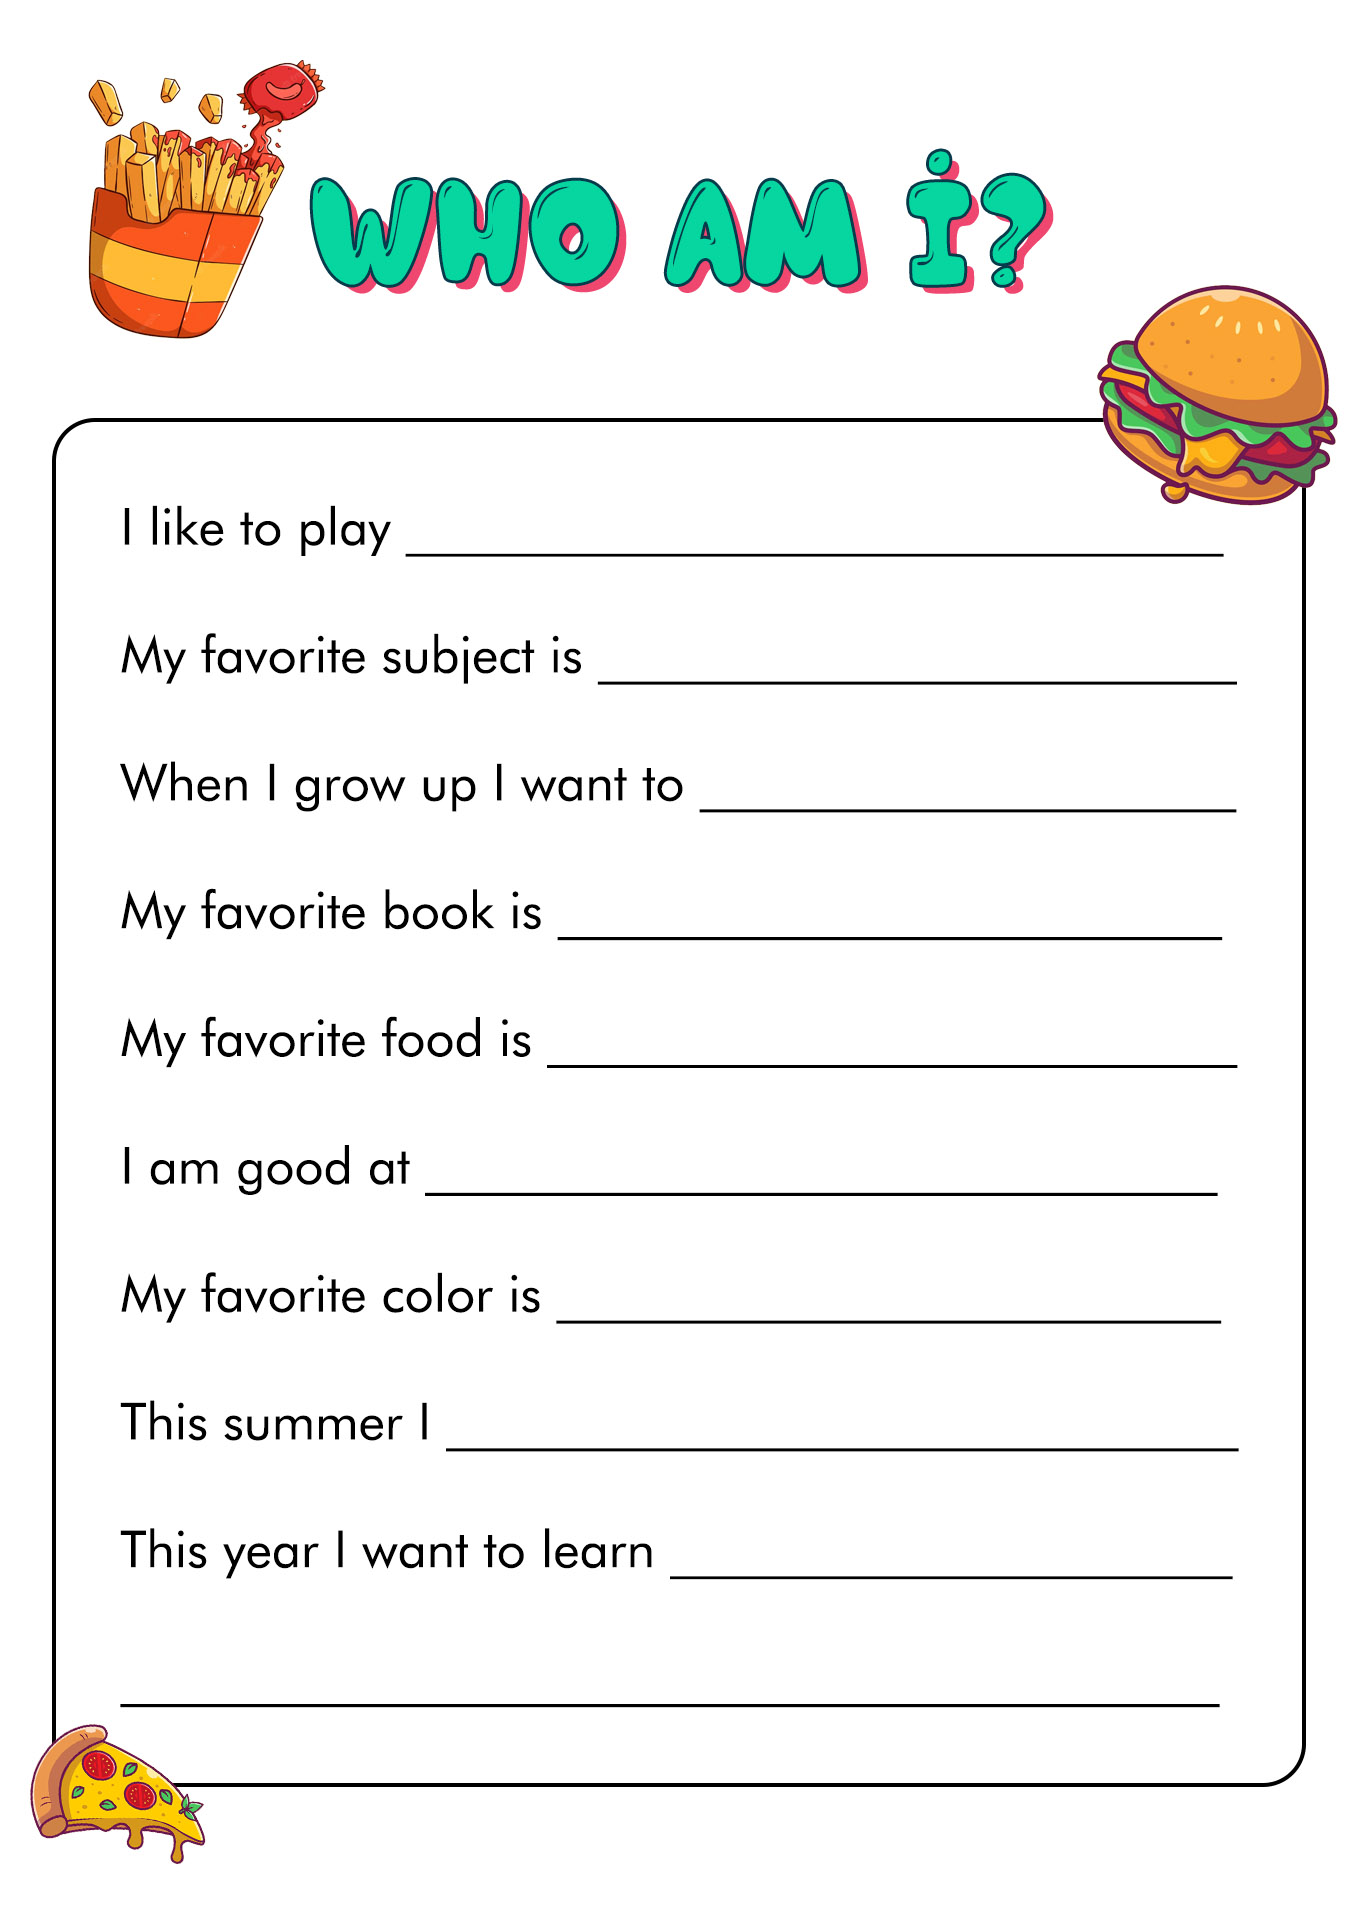 Who AM I Activities Sheet Image